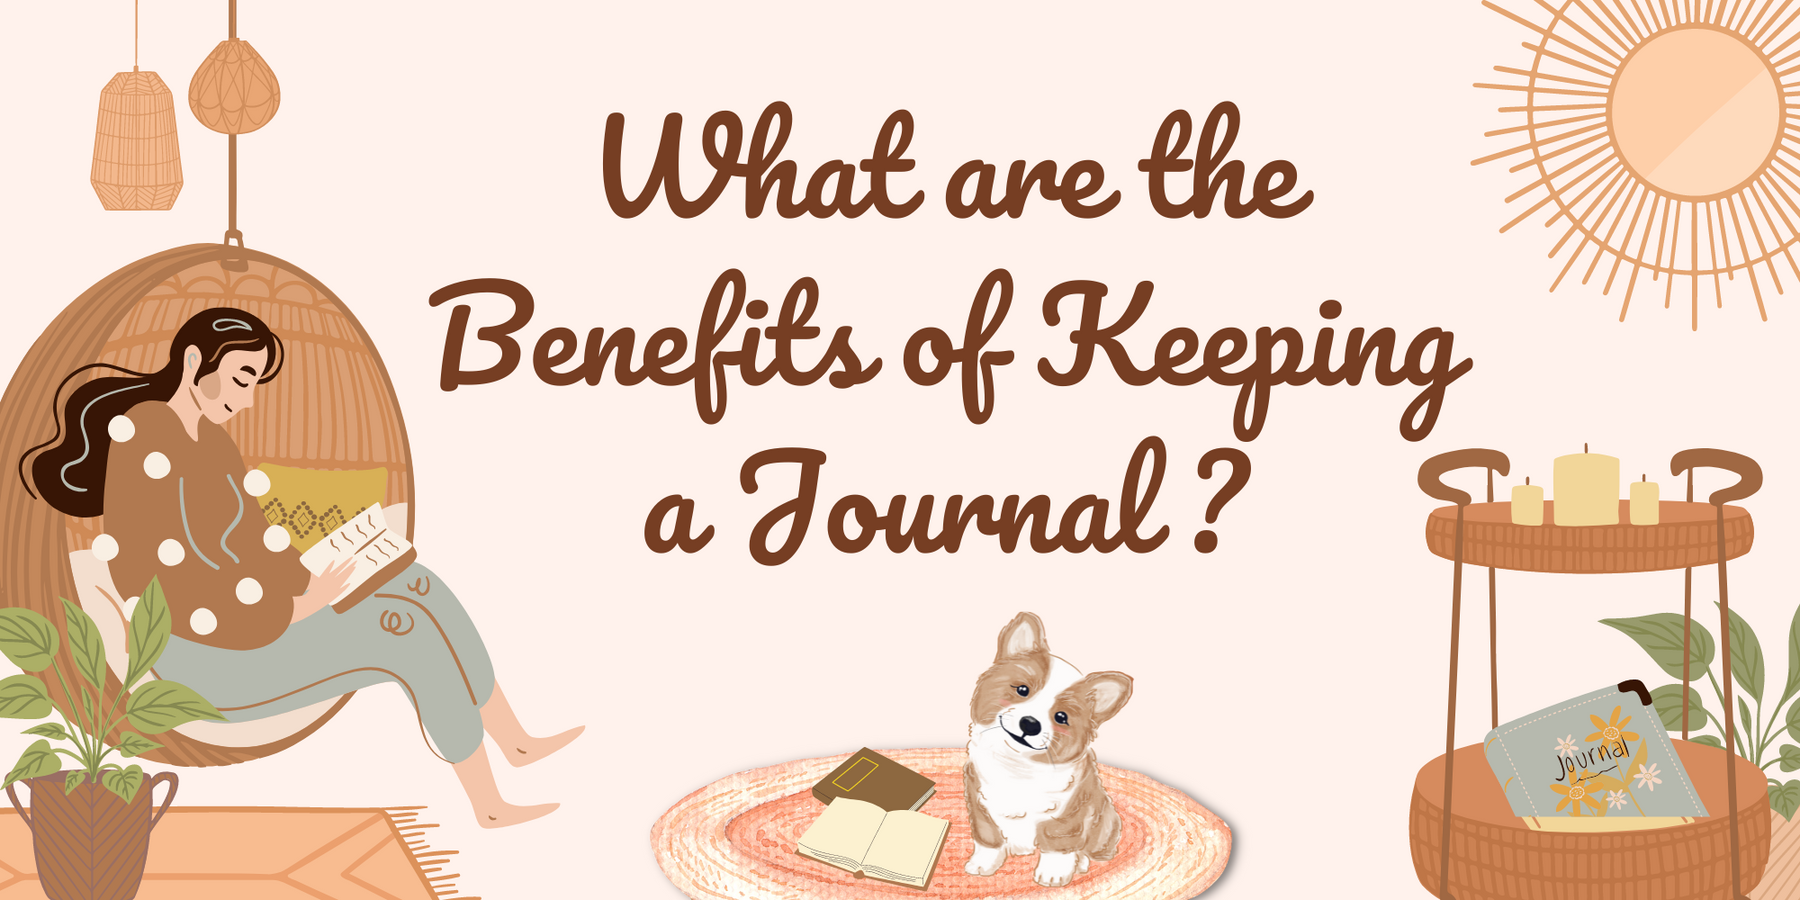 What are the Benefits of Keeping a Journal?